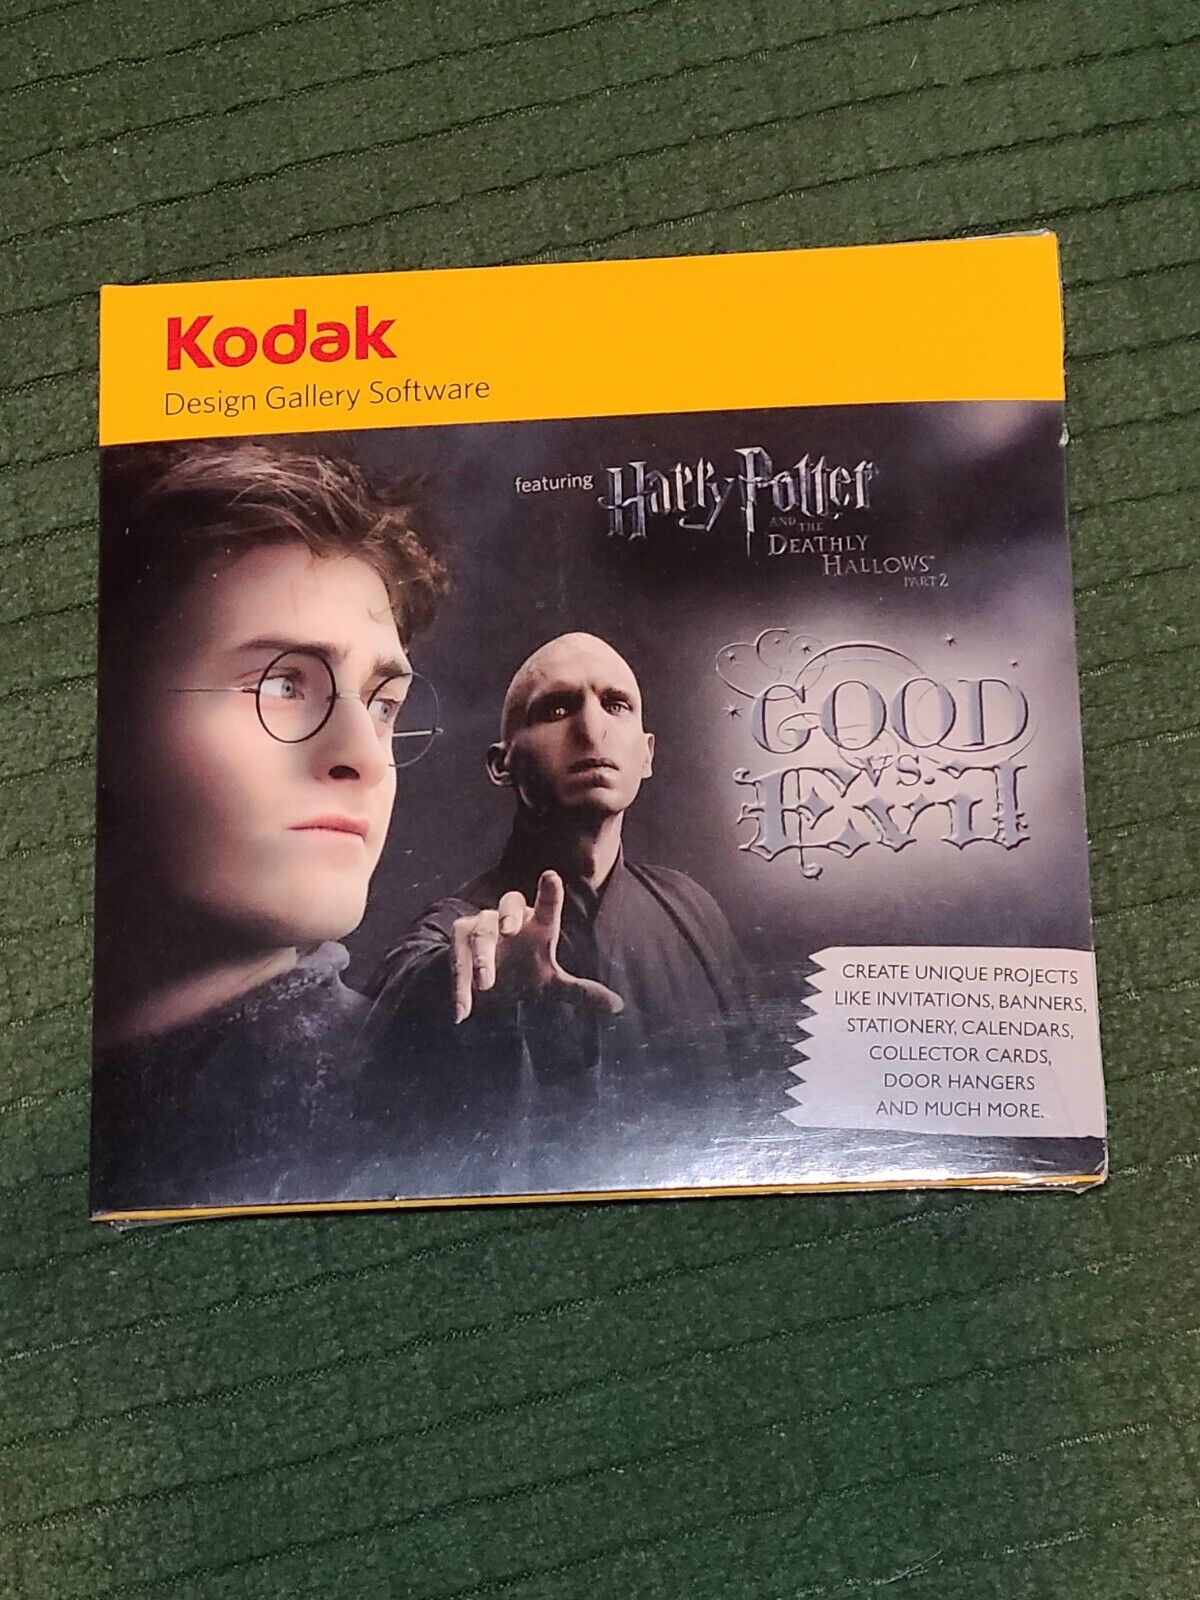 Kodak Design Gallery Software: Harry Potter and the Deathly Hallows 2011